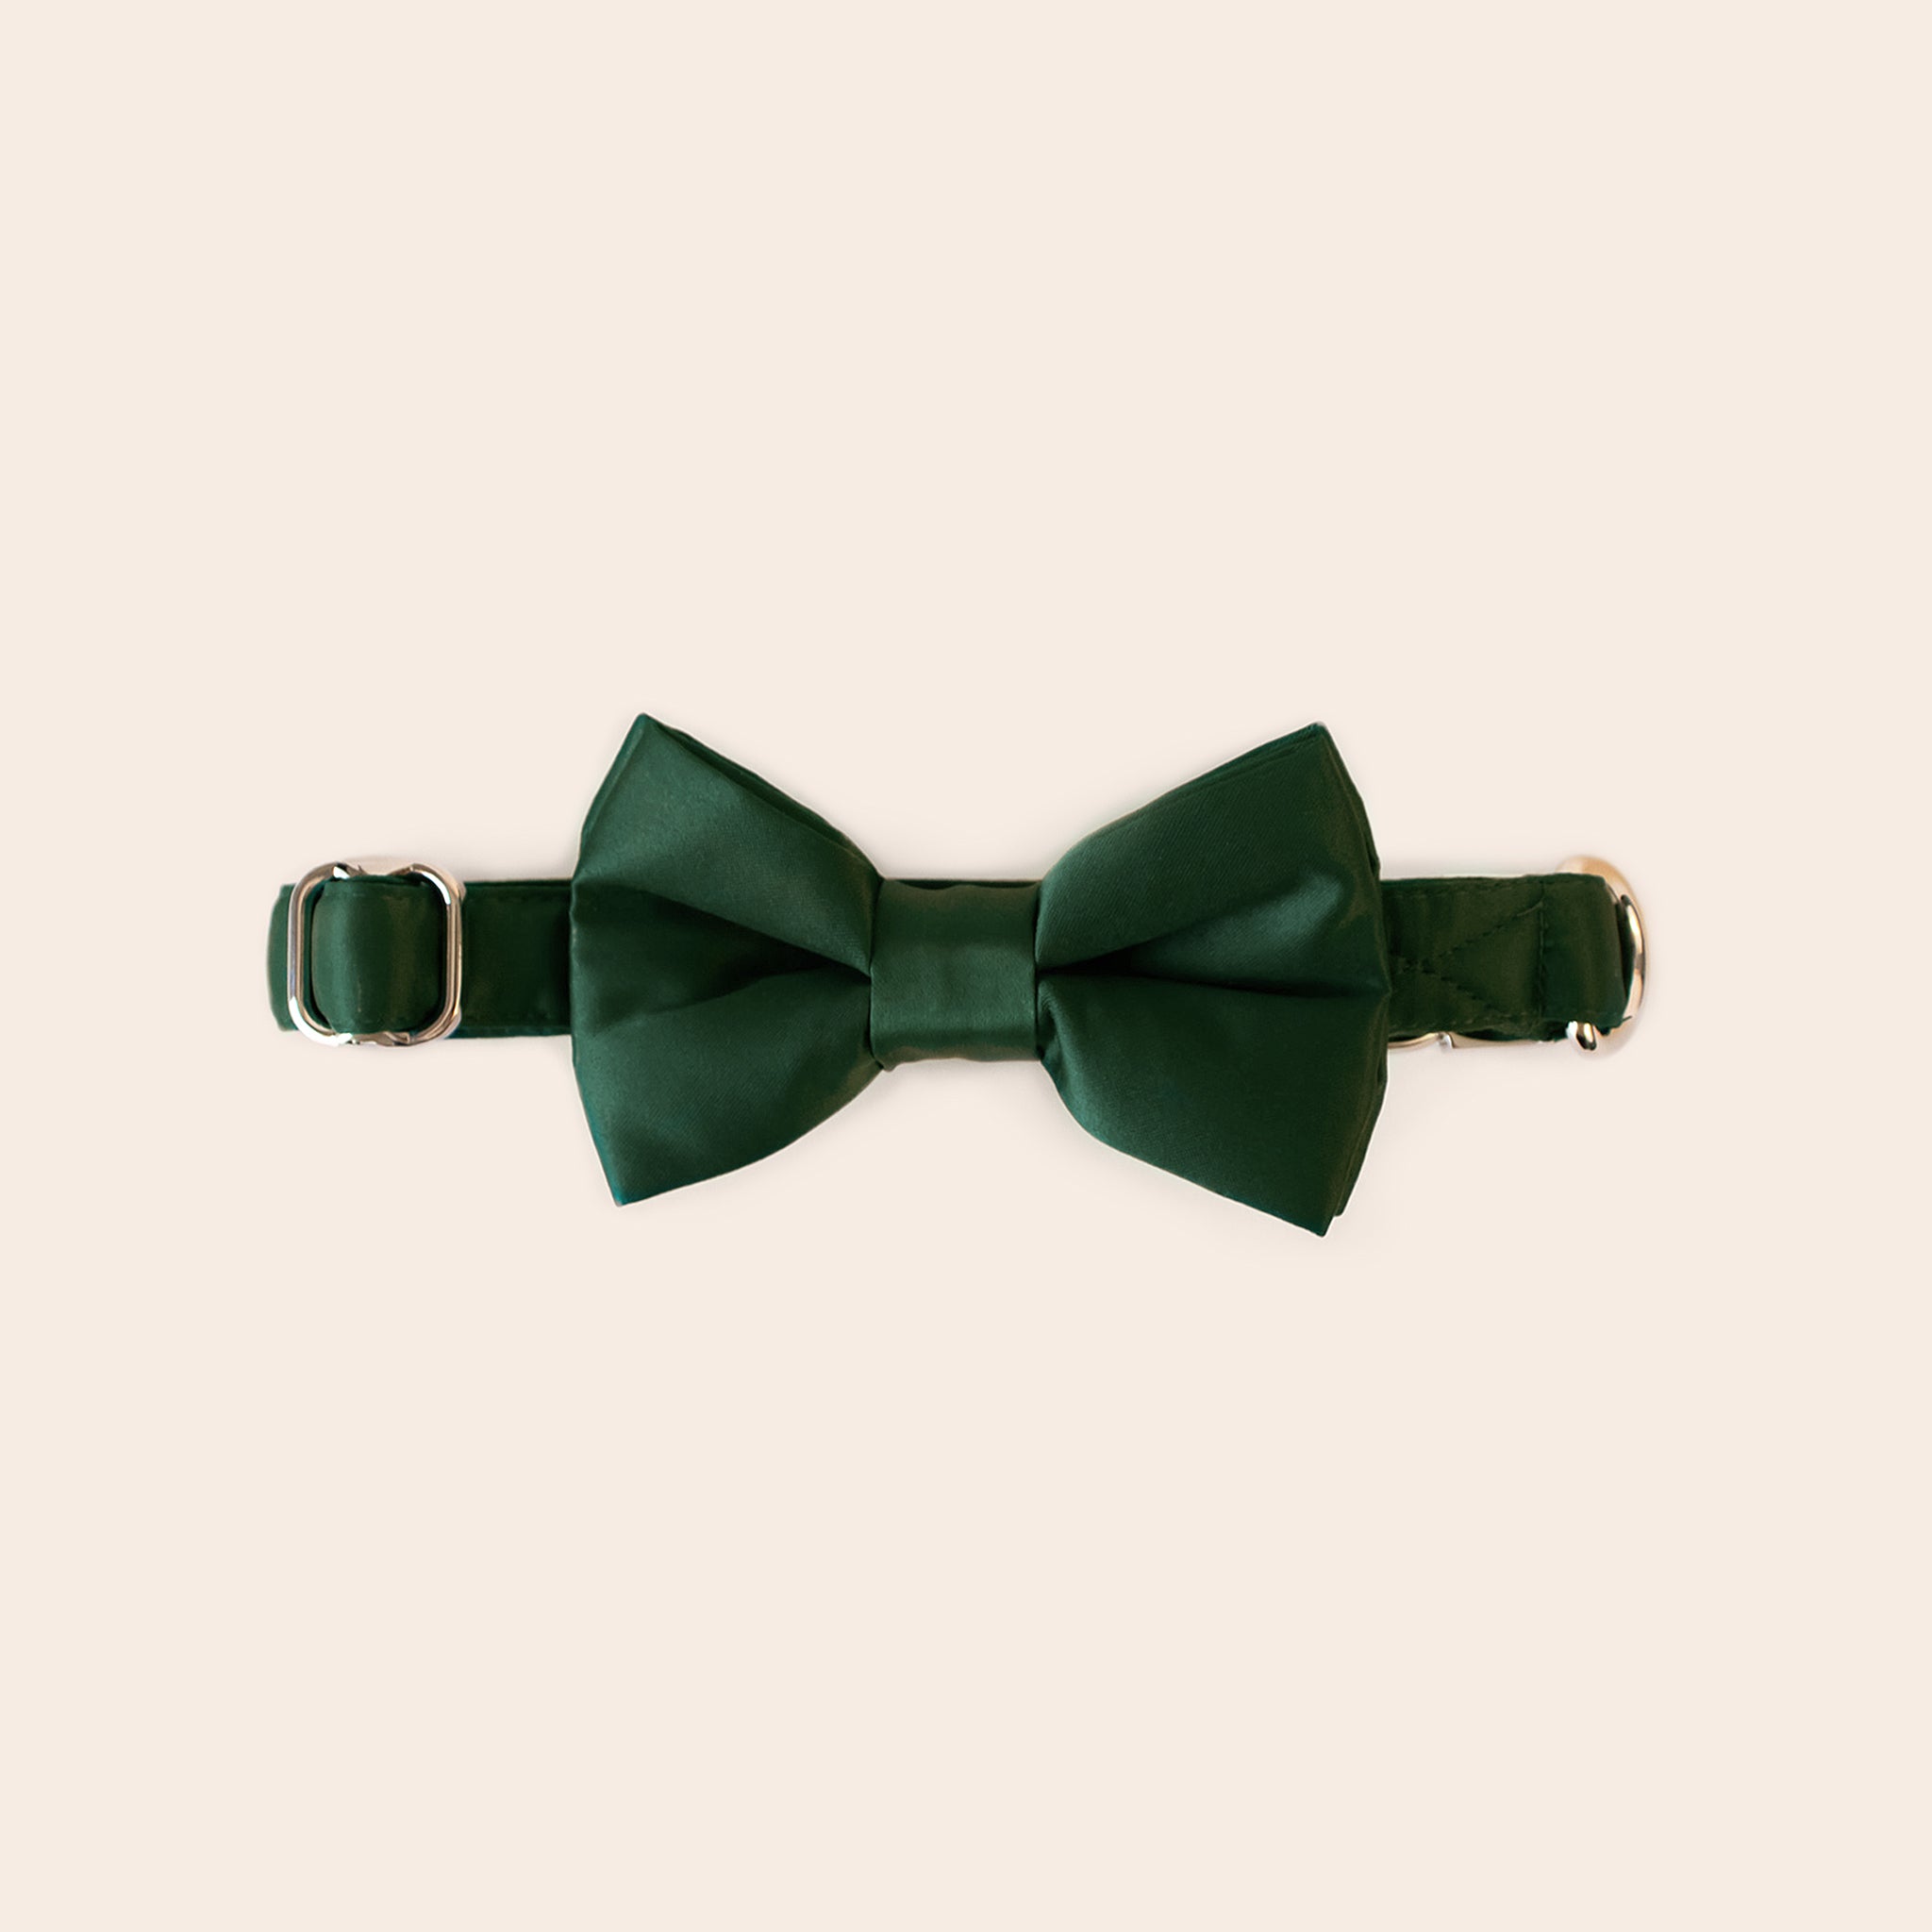 Muggsy Dog Bow Tie Collar in Emerald by Birdy Grey, front view